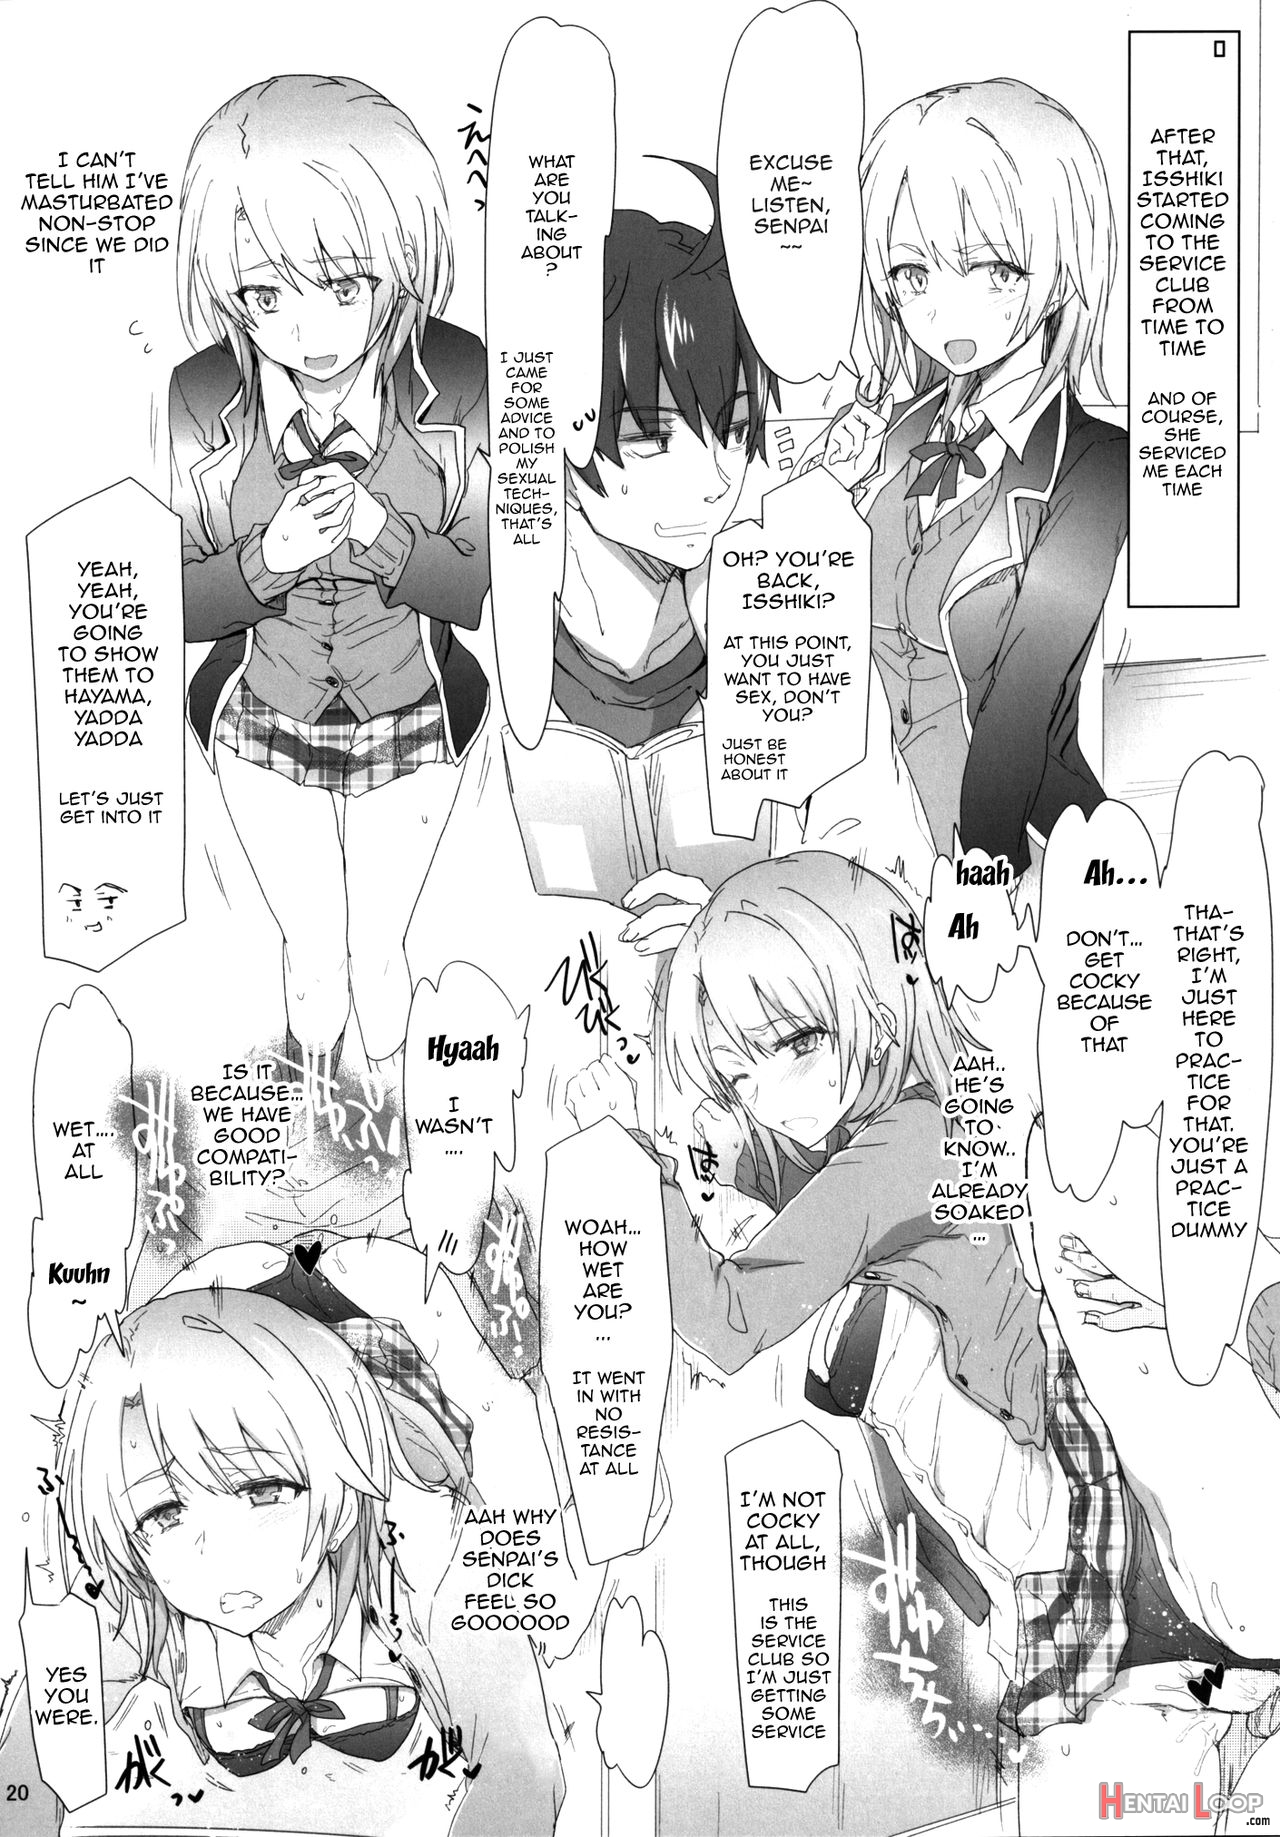 The Sexual Activities Of The Volunteer Club page 19